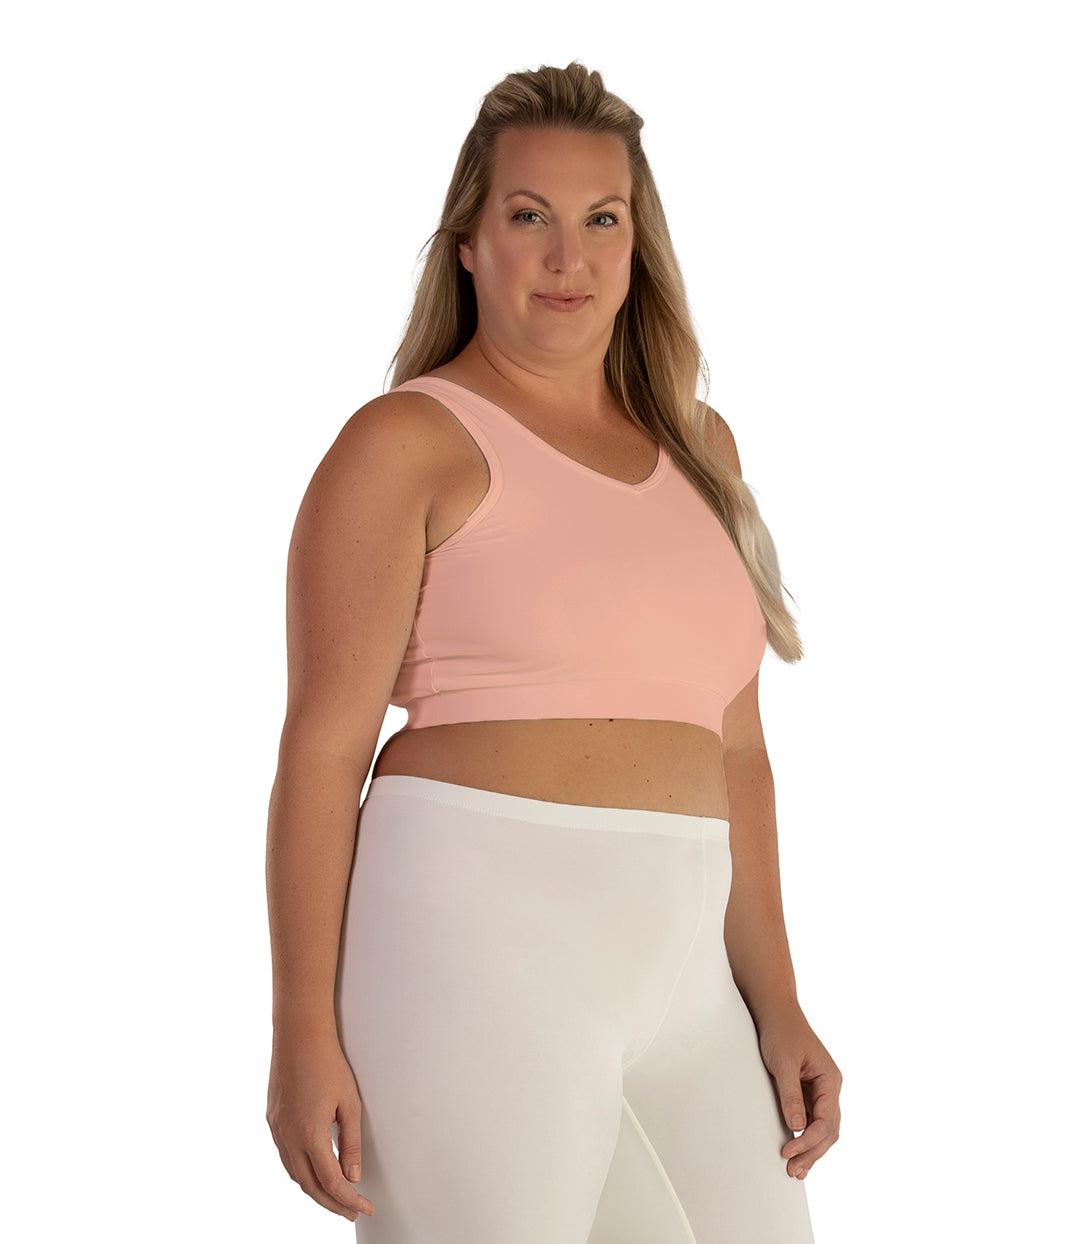 Plus size woman, facing front, wearing JunoActive plus size Junowear Hush V-Neck Bra in Peach. The woman is wearing a white Junowear Hush Boxer brief. Her arms fall naturally to her side.